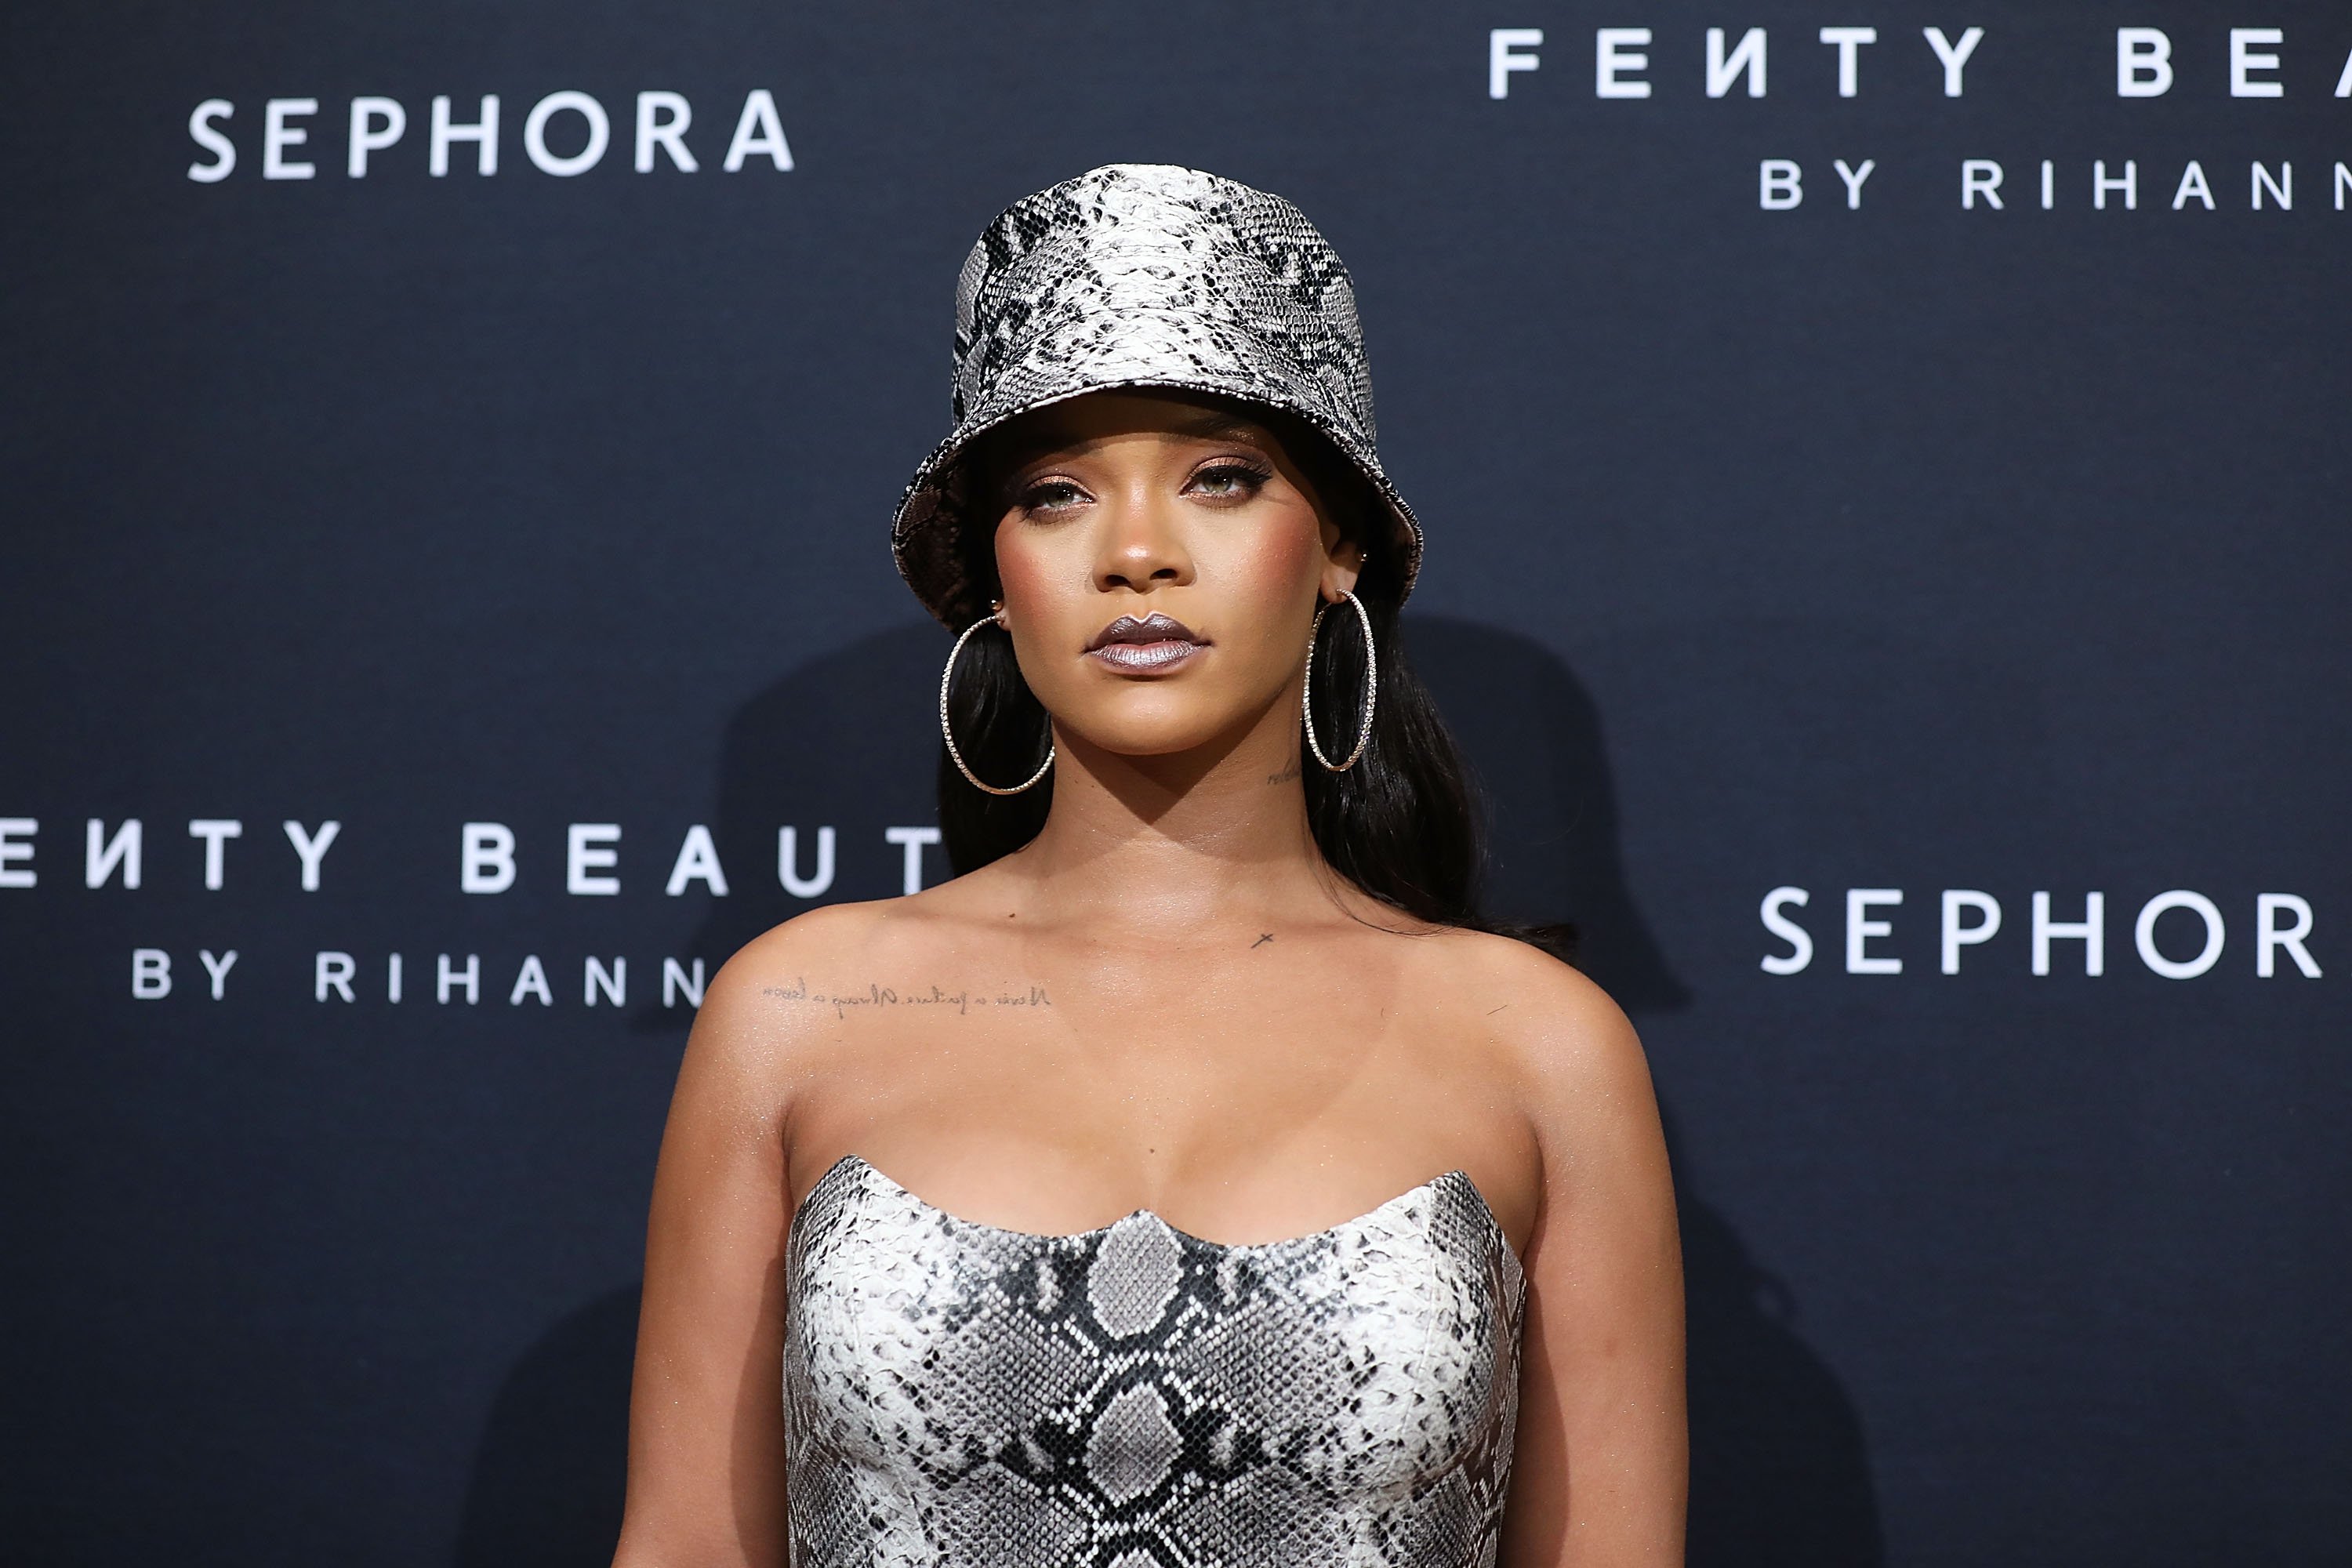 Rihanna attends the Fenty Beauty by Rihanna Anniversary Event on October 03, 2018. | Photo: GettyImages